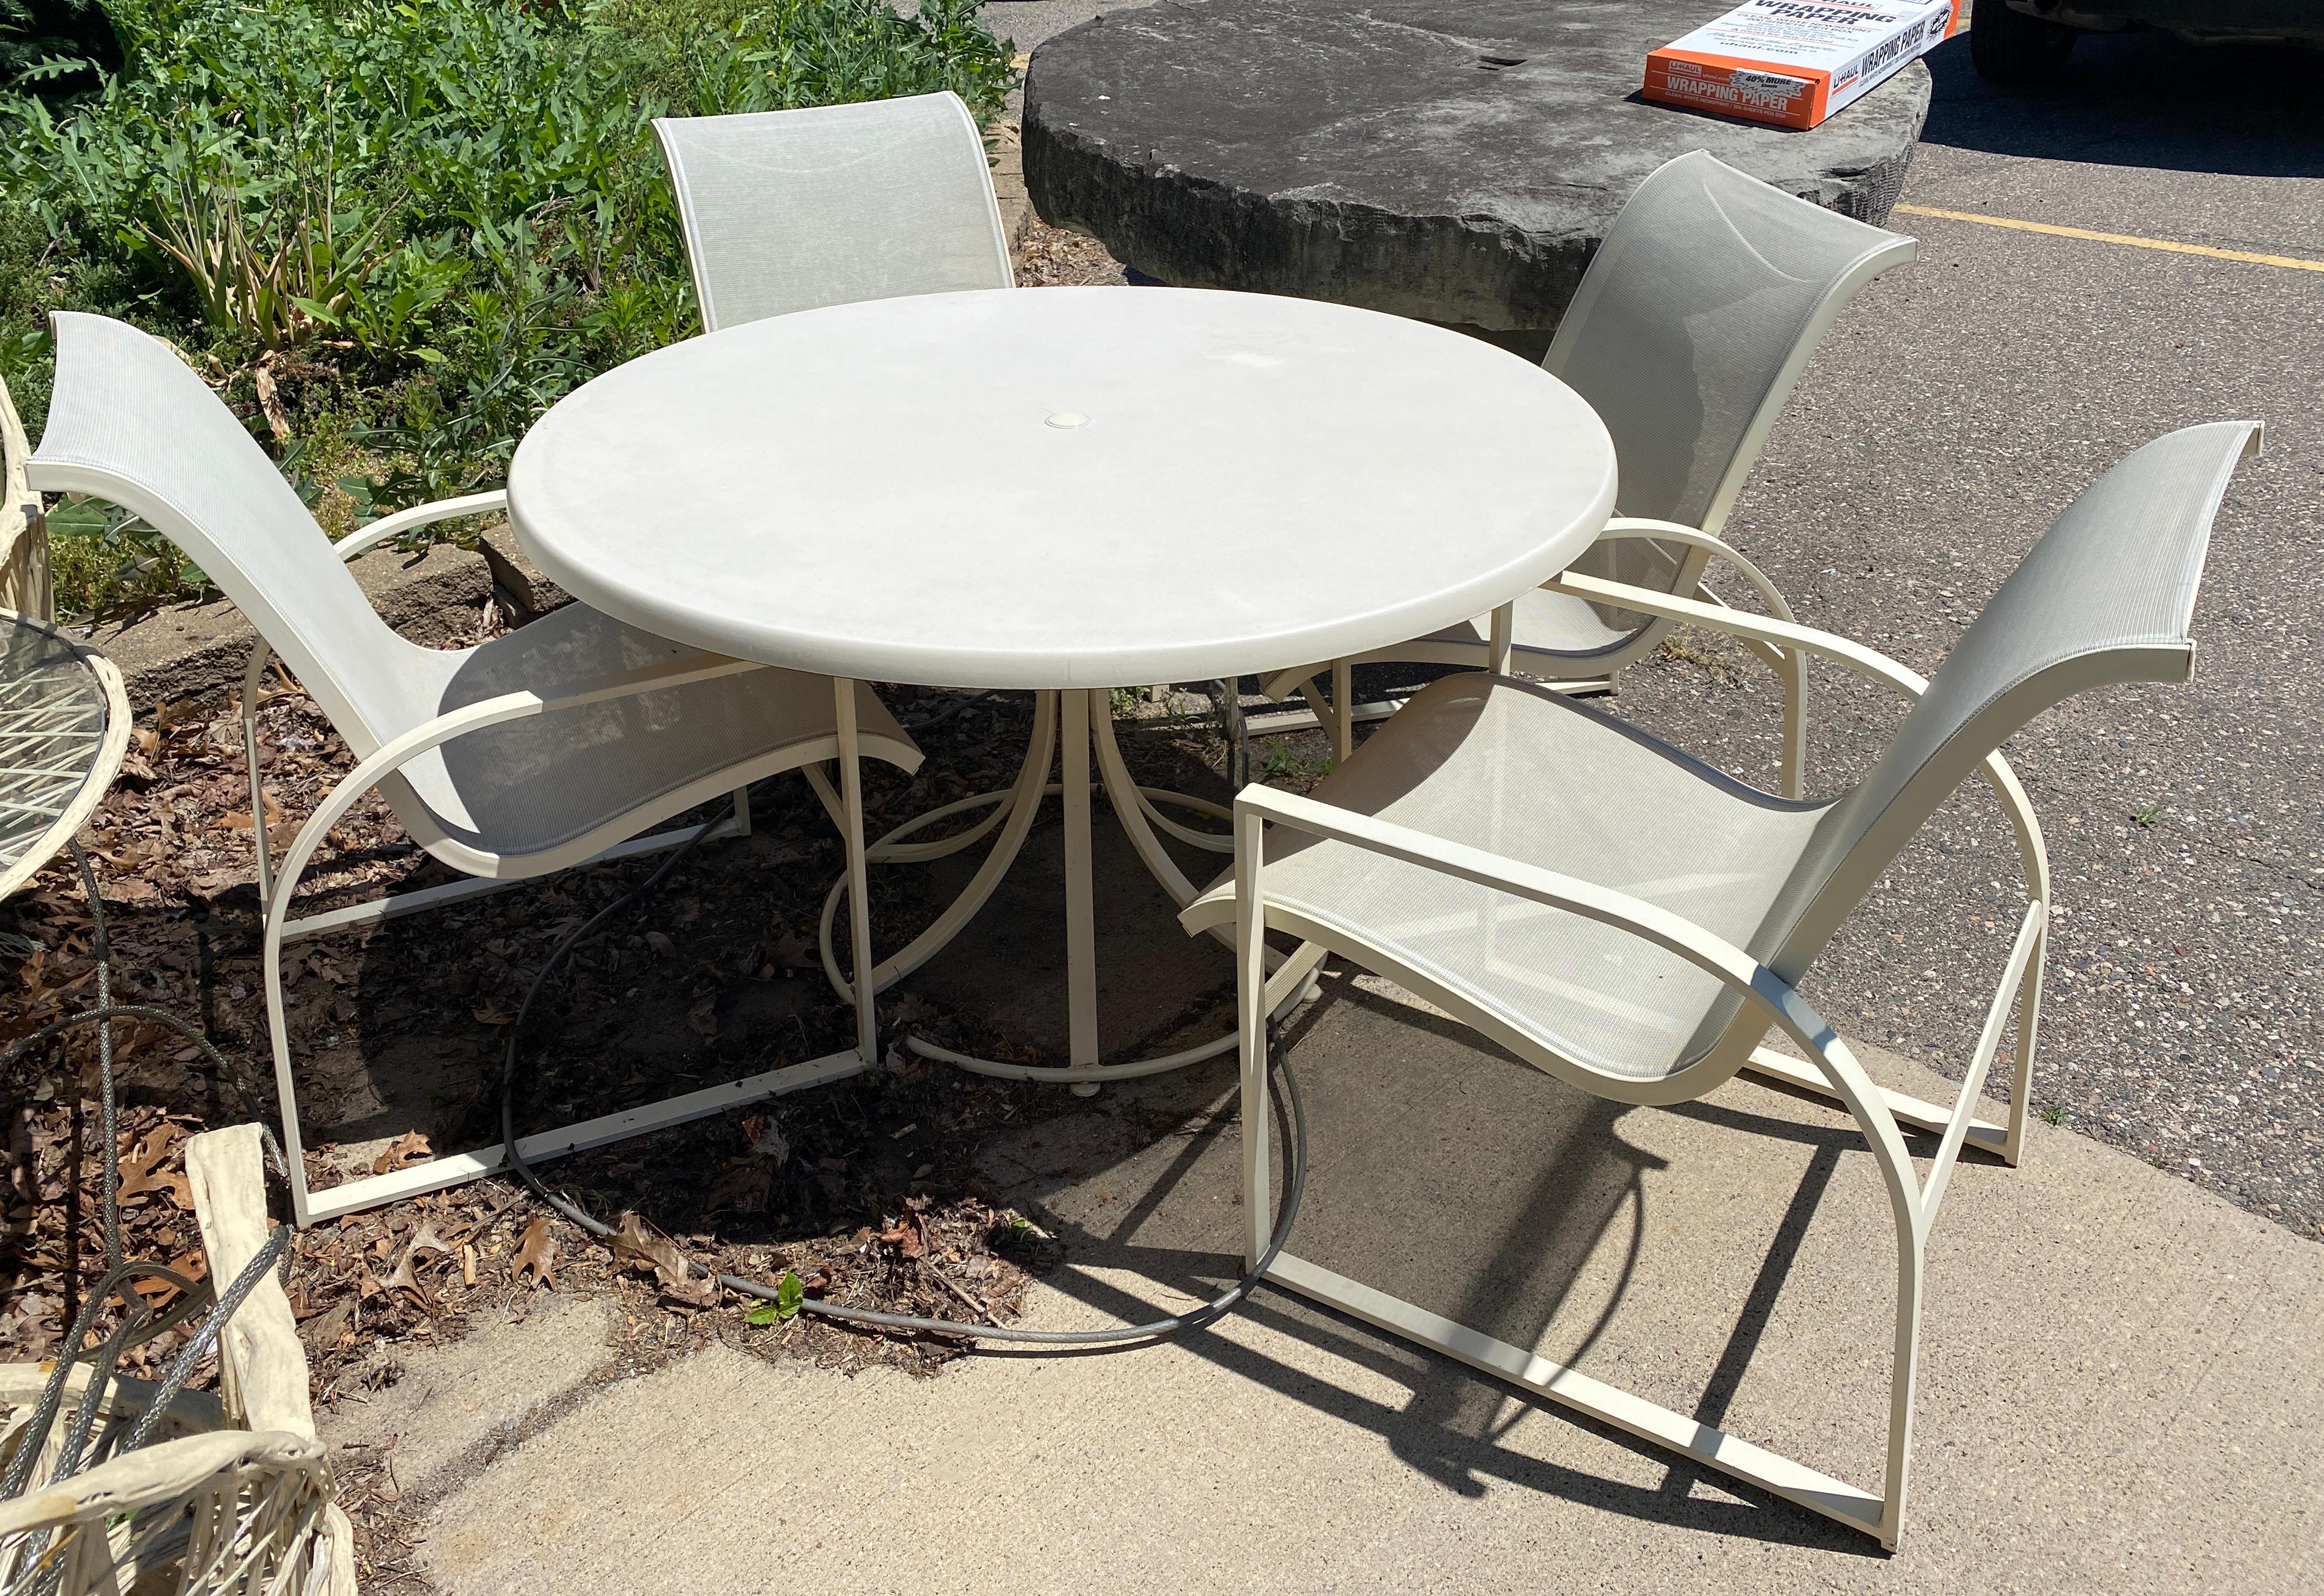 For your consideration is a phenomenal outdoor patio set of four Margaraita patio chairs and matching dining table, by Russell Woodard, circa 1960s. In very good vintage condition. The dimensions of the chairs are 23.5